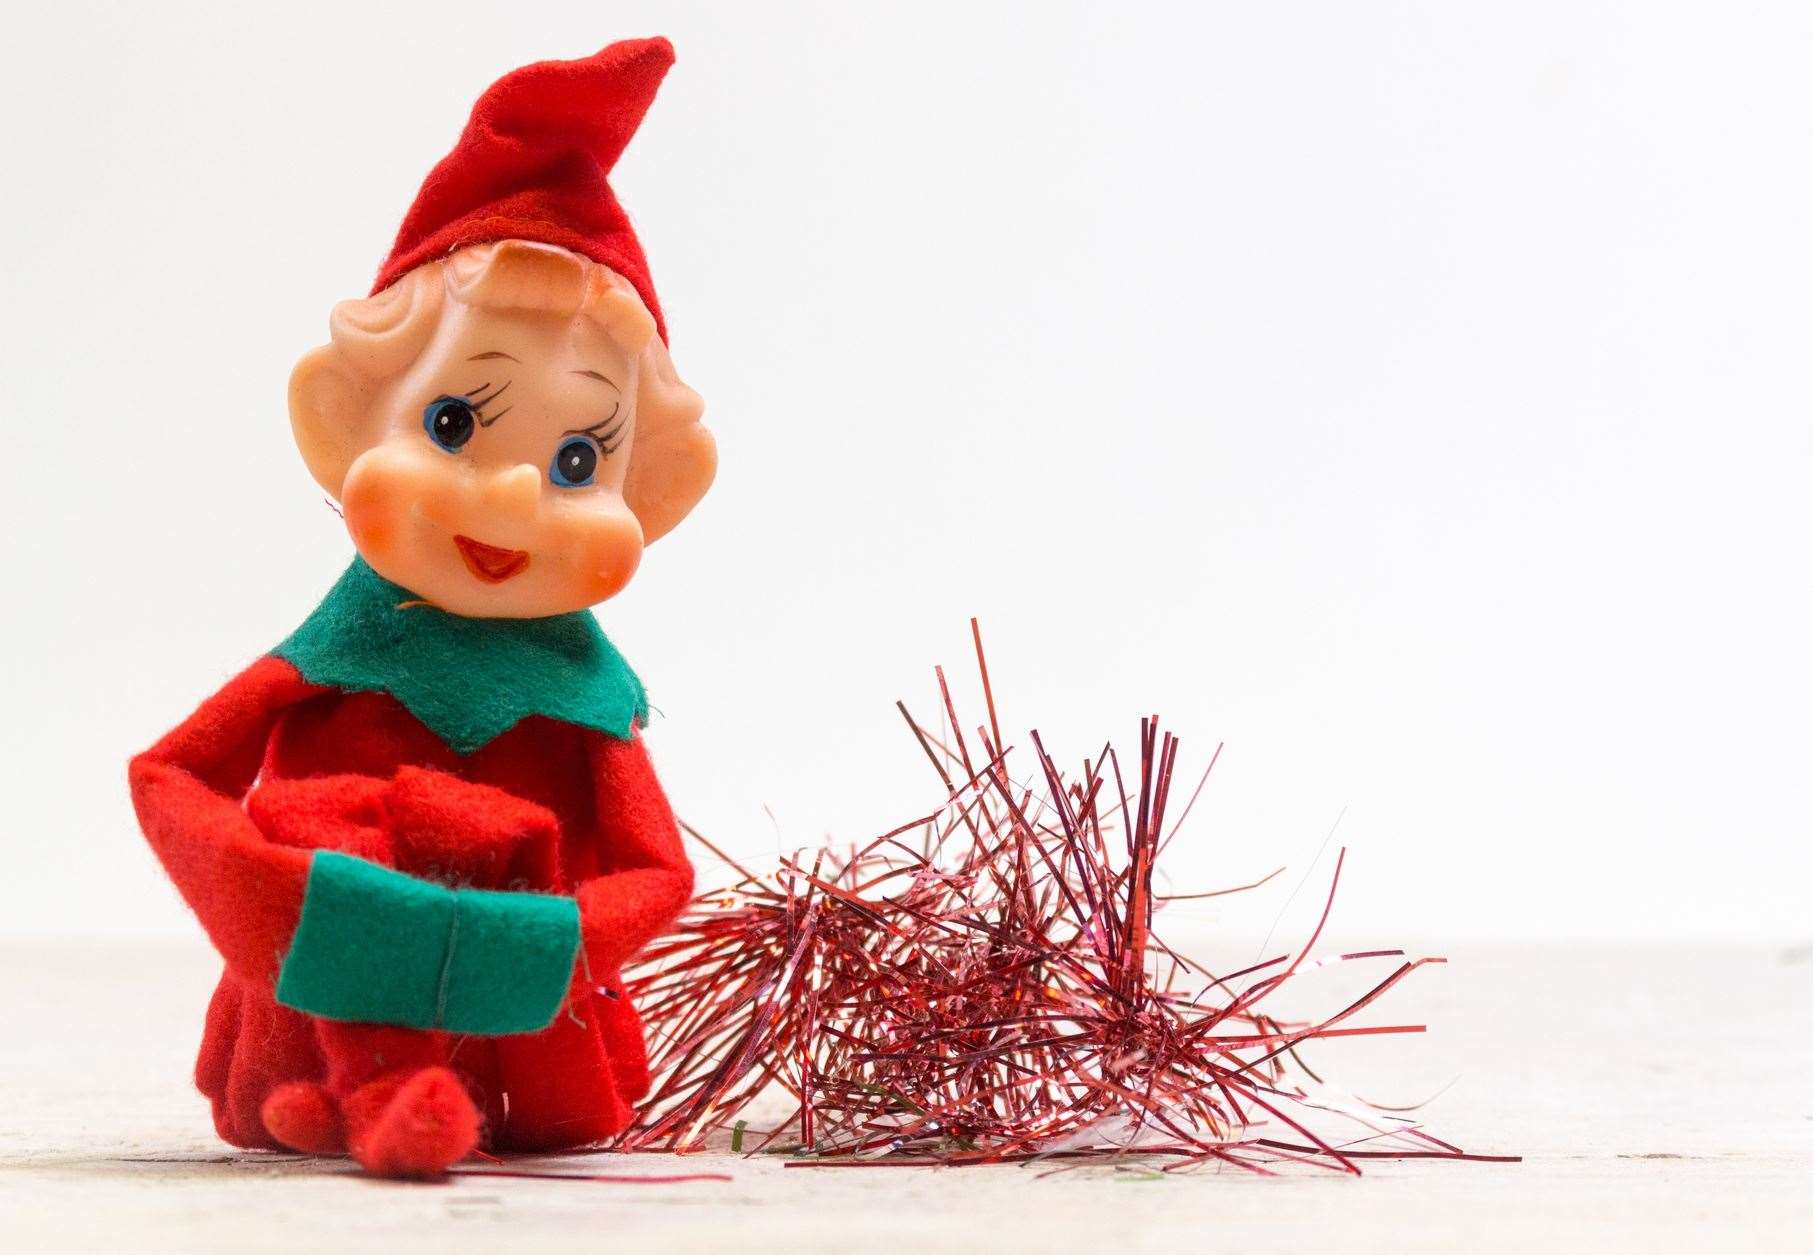 Tiny visiting elves are becoming a popular tradition. Image: iStock/Cindy Shebley.